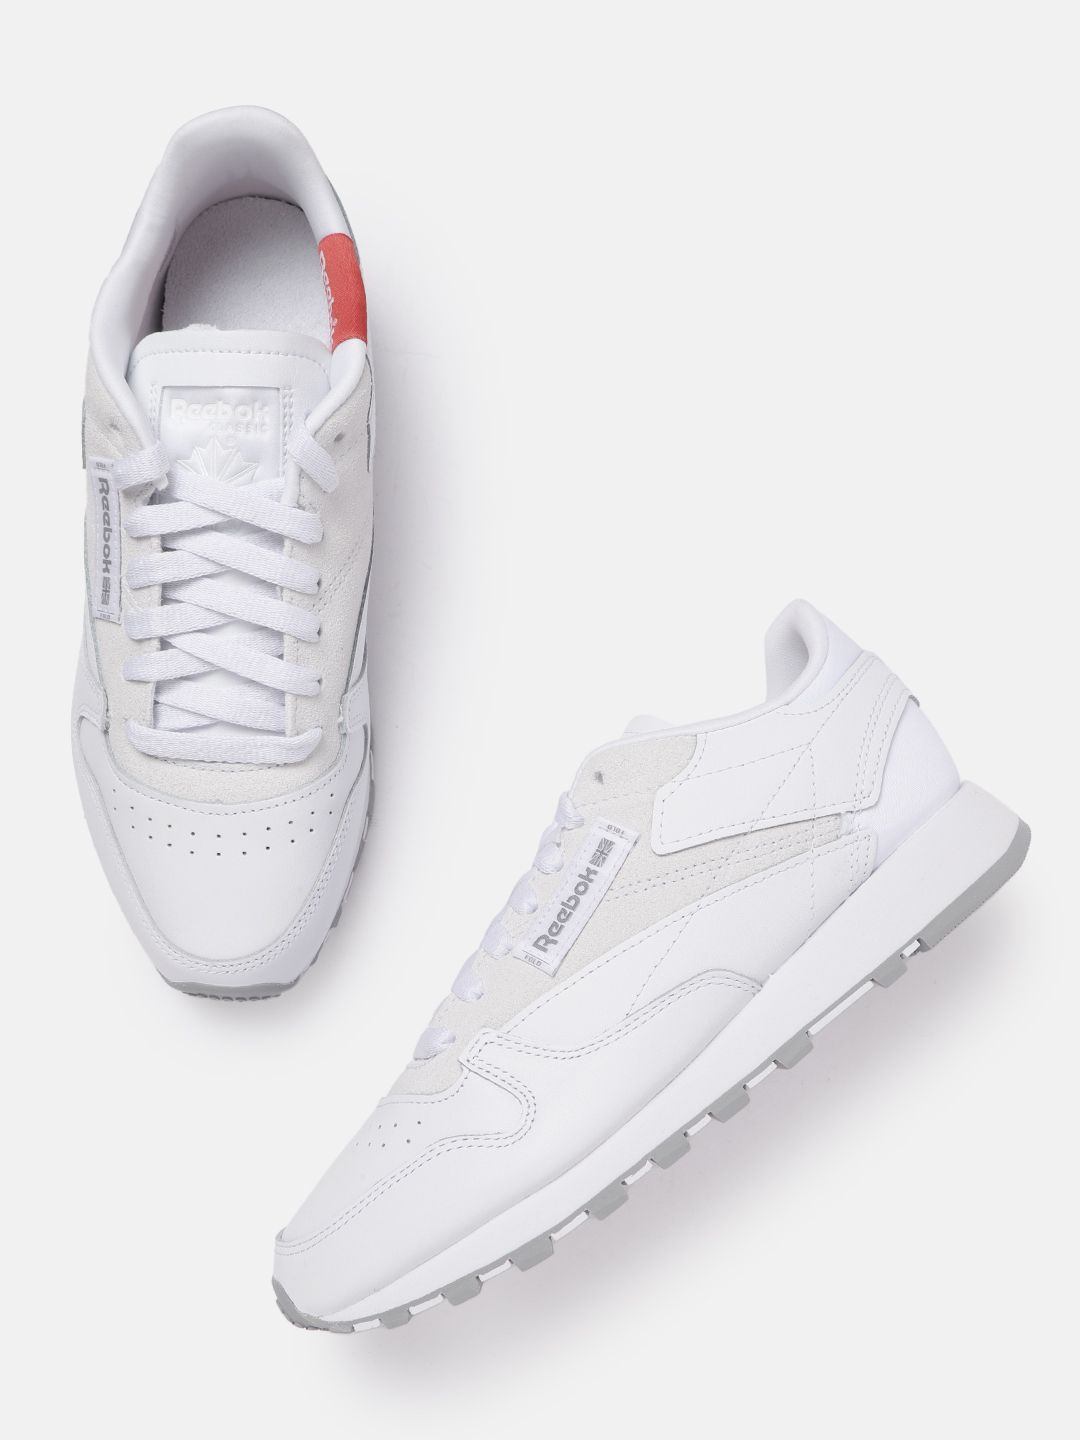 Reebok Classic Women White Perforated Detail Leather Sneakers Price in India